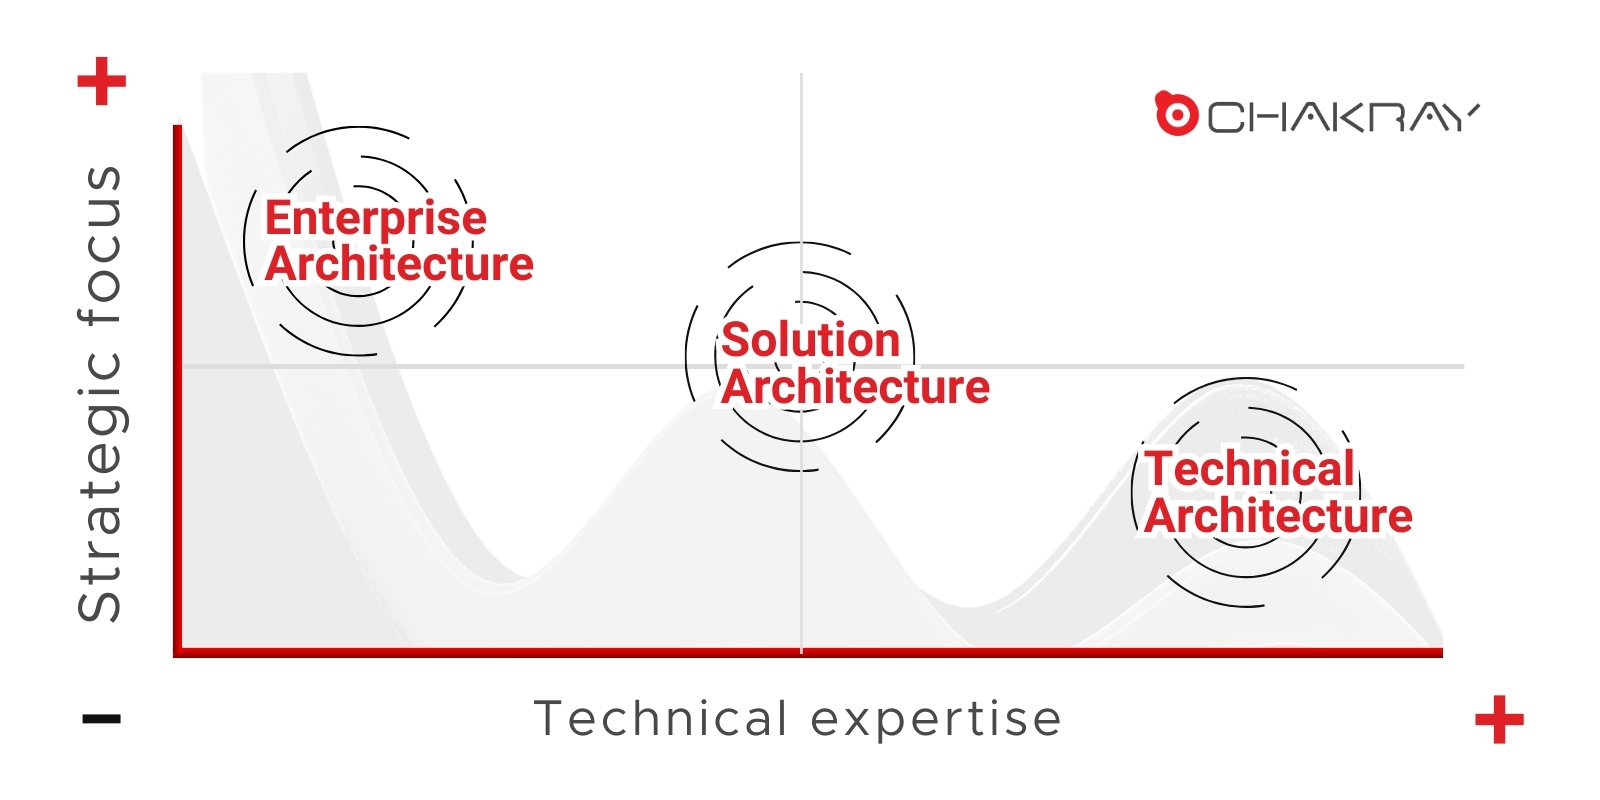 The hierarchy between Enterprise Architecture vs Solution Architecture and vs Technical Architecture